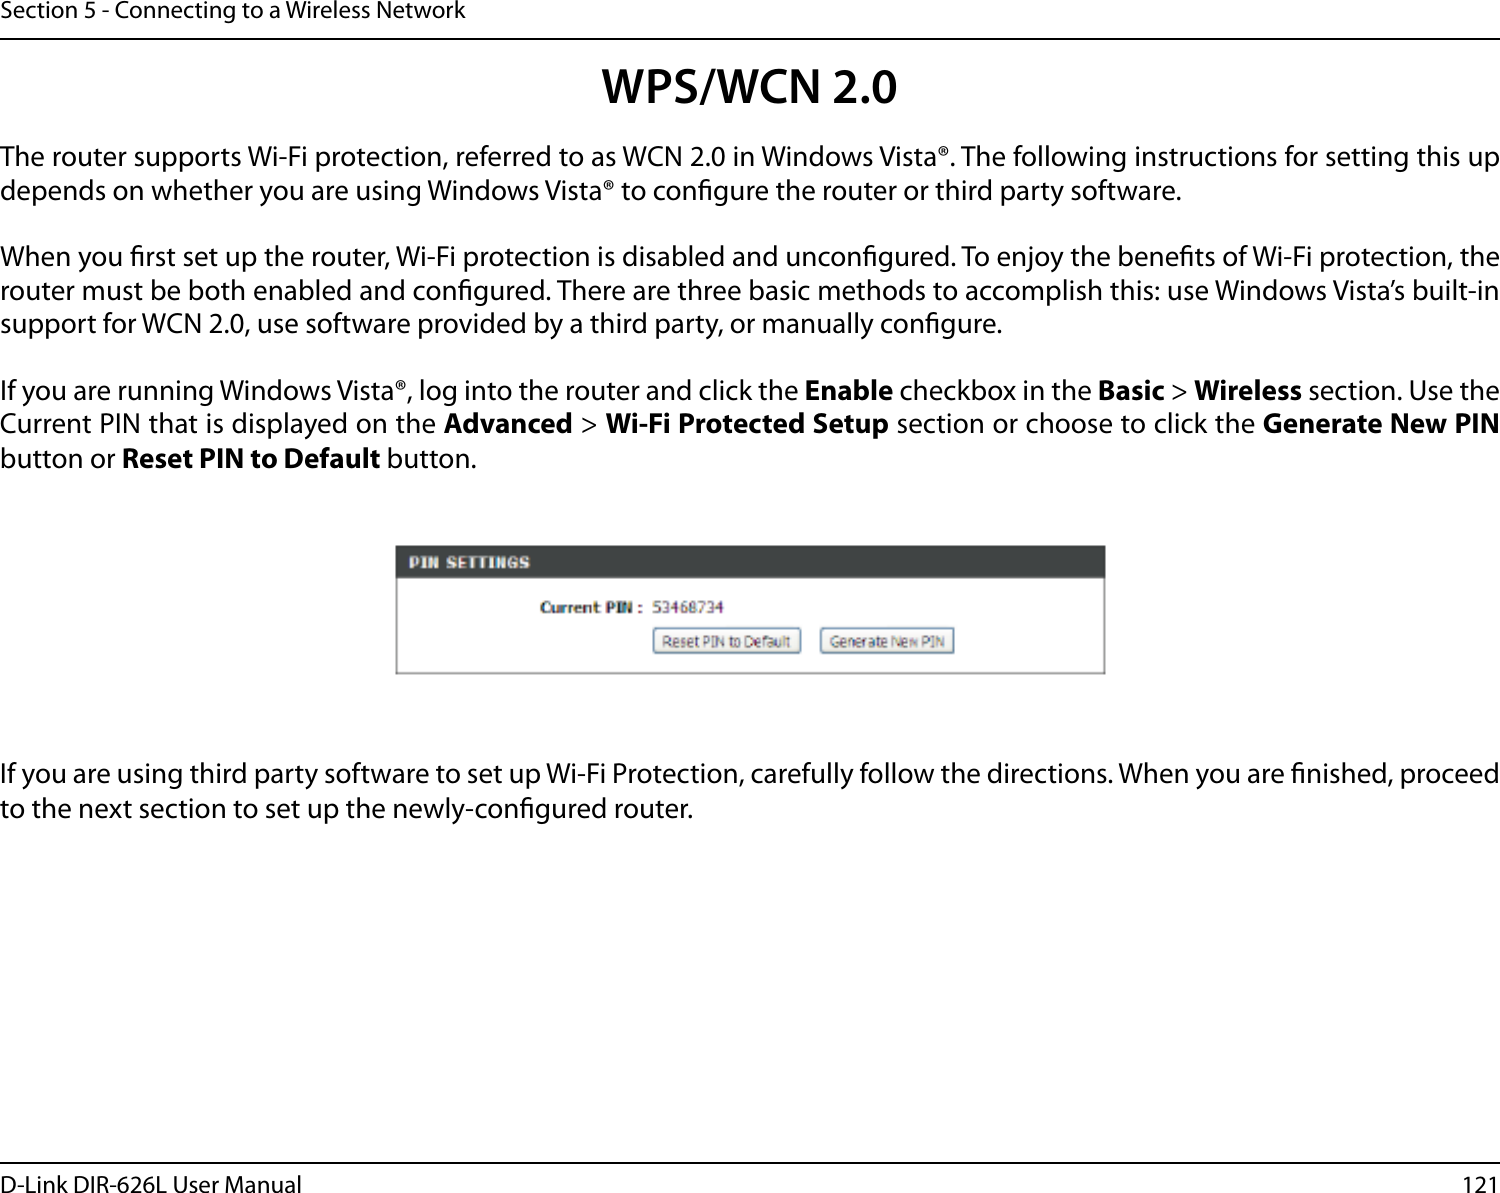 121D-Link DIR-626L User ManualSection 5 - Connecting to a Wireless NetworkWPS/WCN 2.0The router supports Wi-Fi protection, referred to as WCN 2.0 in Windows Vista®. The following instructions for setting this up depends on whether you are using Windows Vista® to congure the router or third party software.        When you rst set up the router, Wi-Fi protection is disabled and uncongured. To enjoy the benets of Wi-Fi protection, the router must be both enabled and congured. There are three basic methods to accomplish this: use Windows Vista’s built-in support for WCN 2.0, use software provided by a third party, or manually congure. If you are running Windows Vista®, log into the router and click the Enable checkbox in the Basic &gt; Wireless section. Use the Current PIN that is displayed on the Advanced &gt; Wi-Fi Protected Setup section or choose to click the Generate New PIN button or Reset PIN to Default button. If you are using third party software to set up Wi-Fi Protection, carefully follow the directions. When you are nished, proceed to the next section to set up the newly-congured router. 